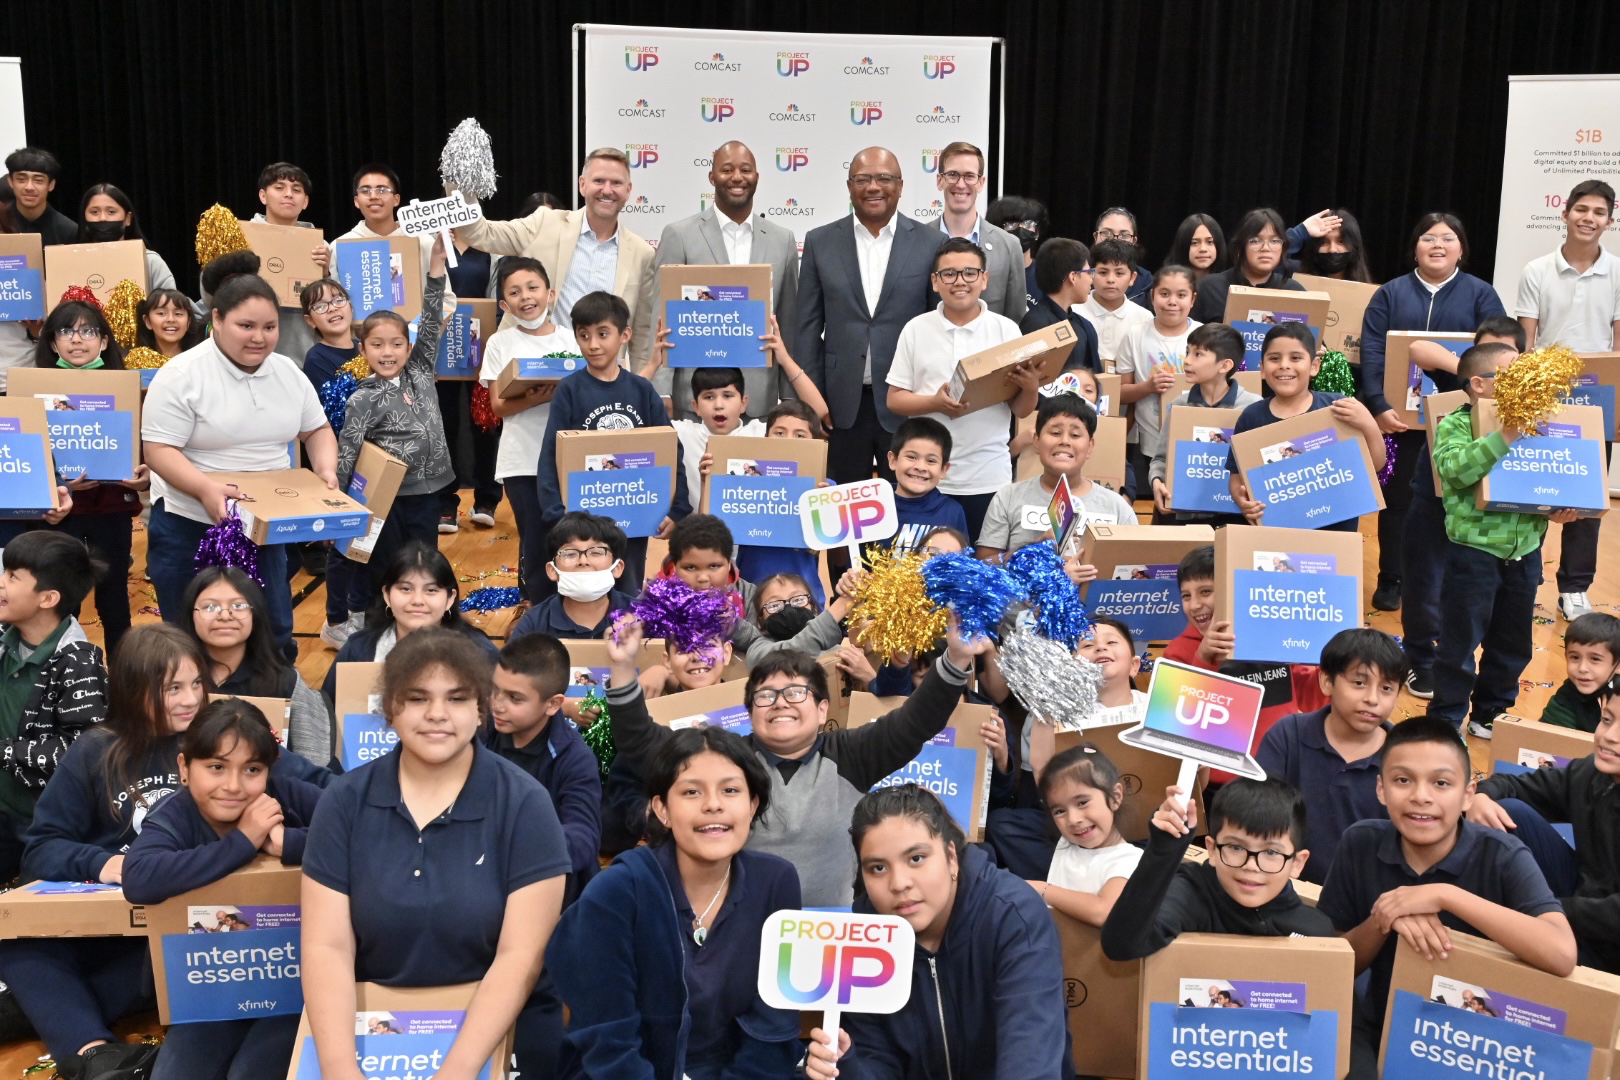 Comcast donates 1,000 laptops to 10 Chicago non-profits in effort to advance digital equity.